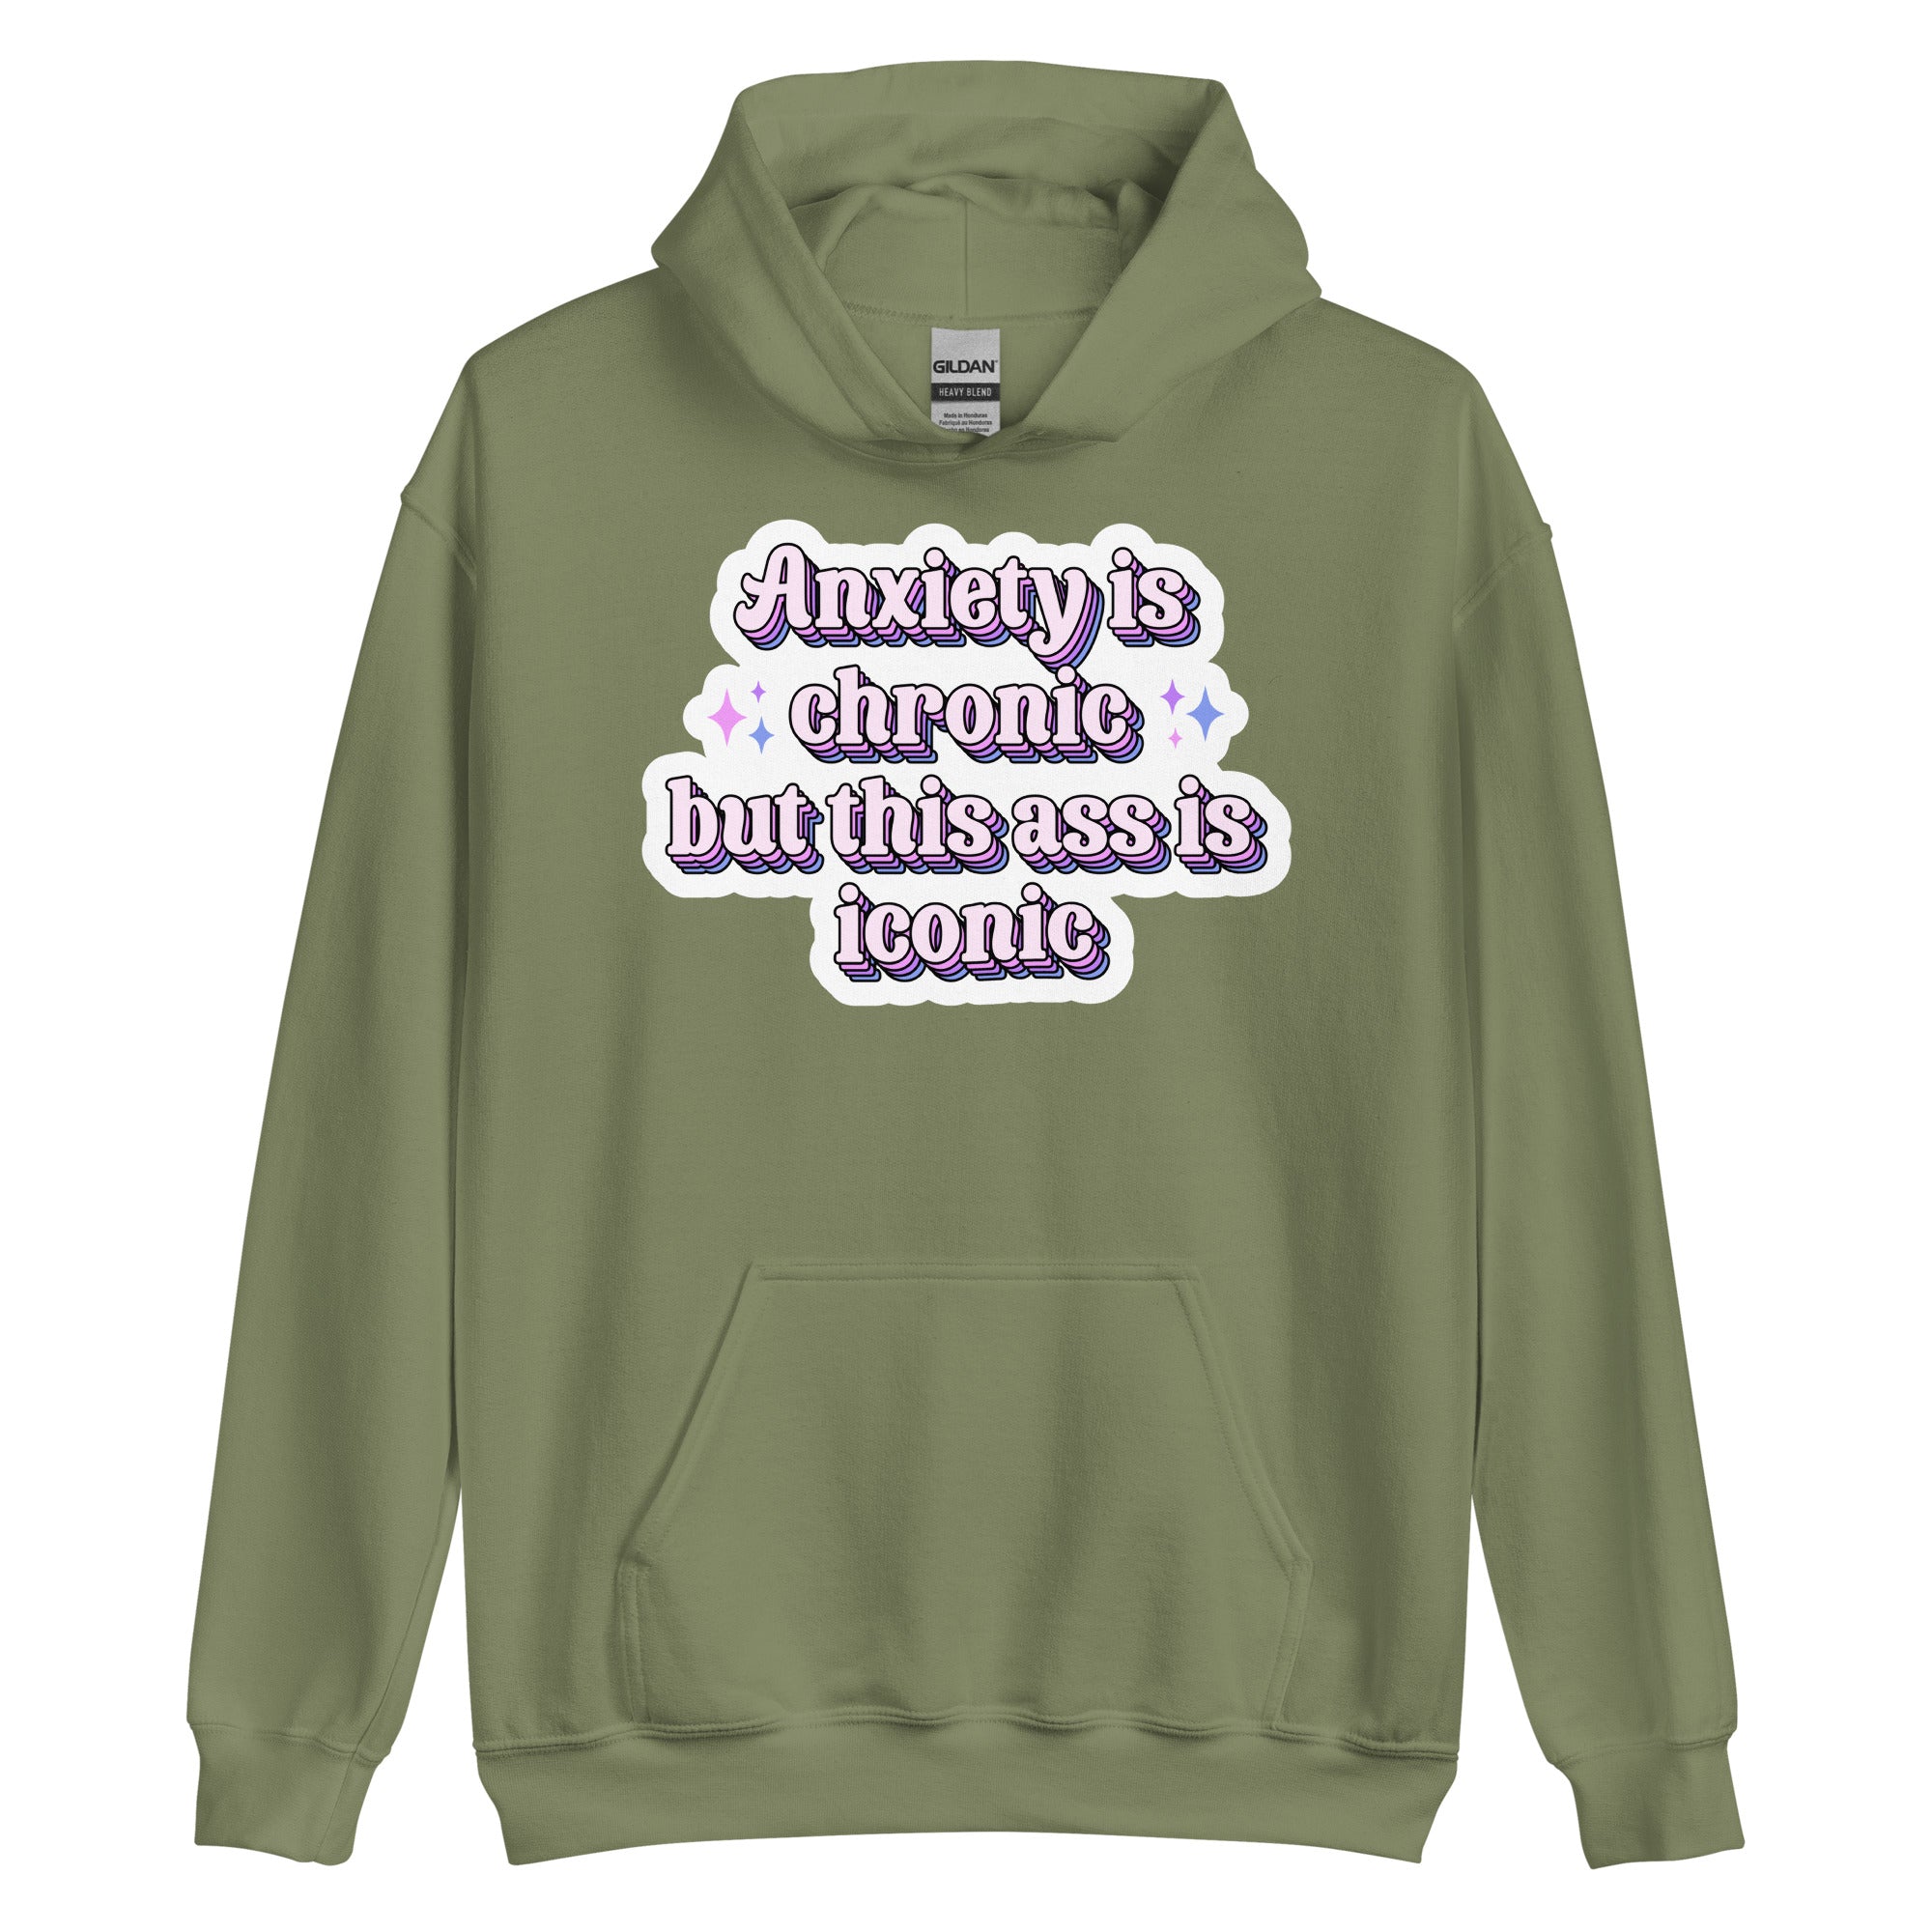 Anxiety is Chronic but this ass is iconic Unisex Sweat Shirt